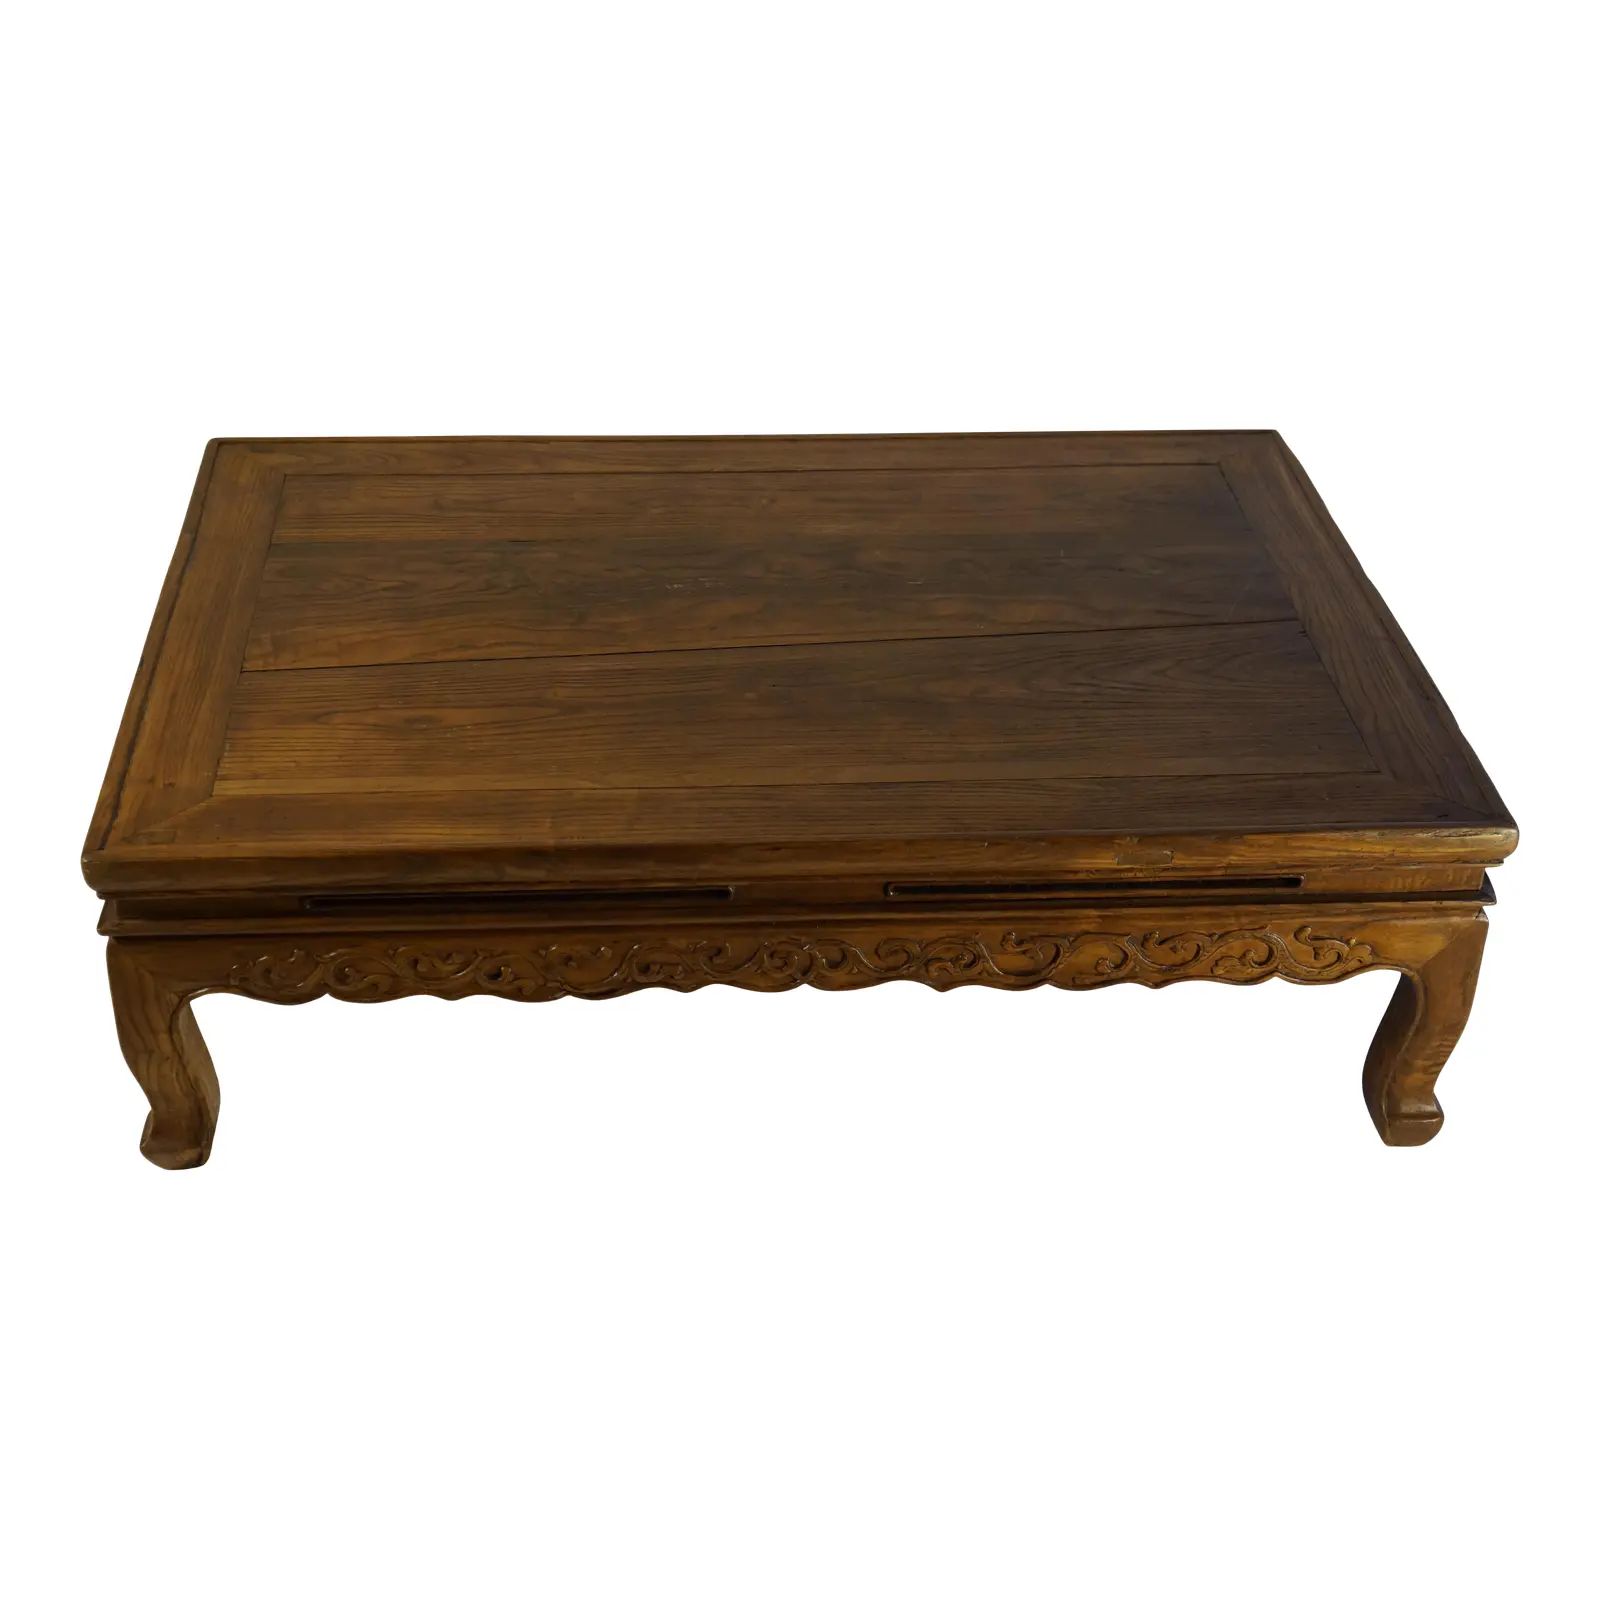 Antique Elm Wood Kang Side Table | Chairish